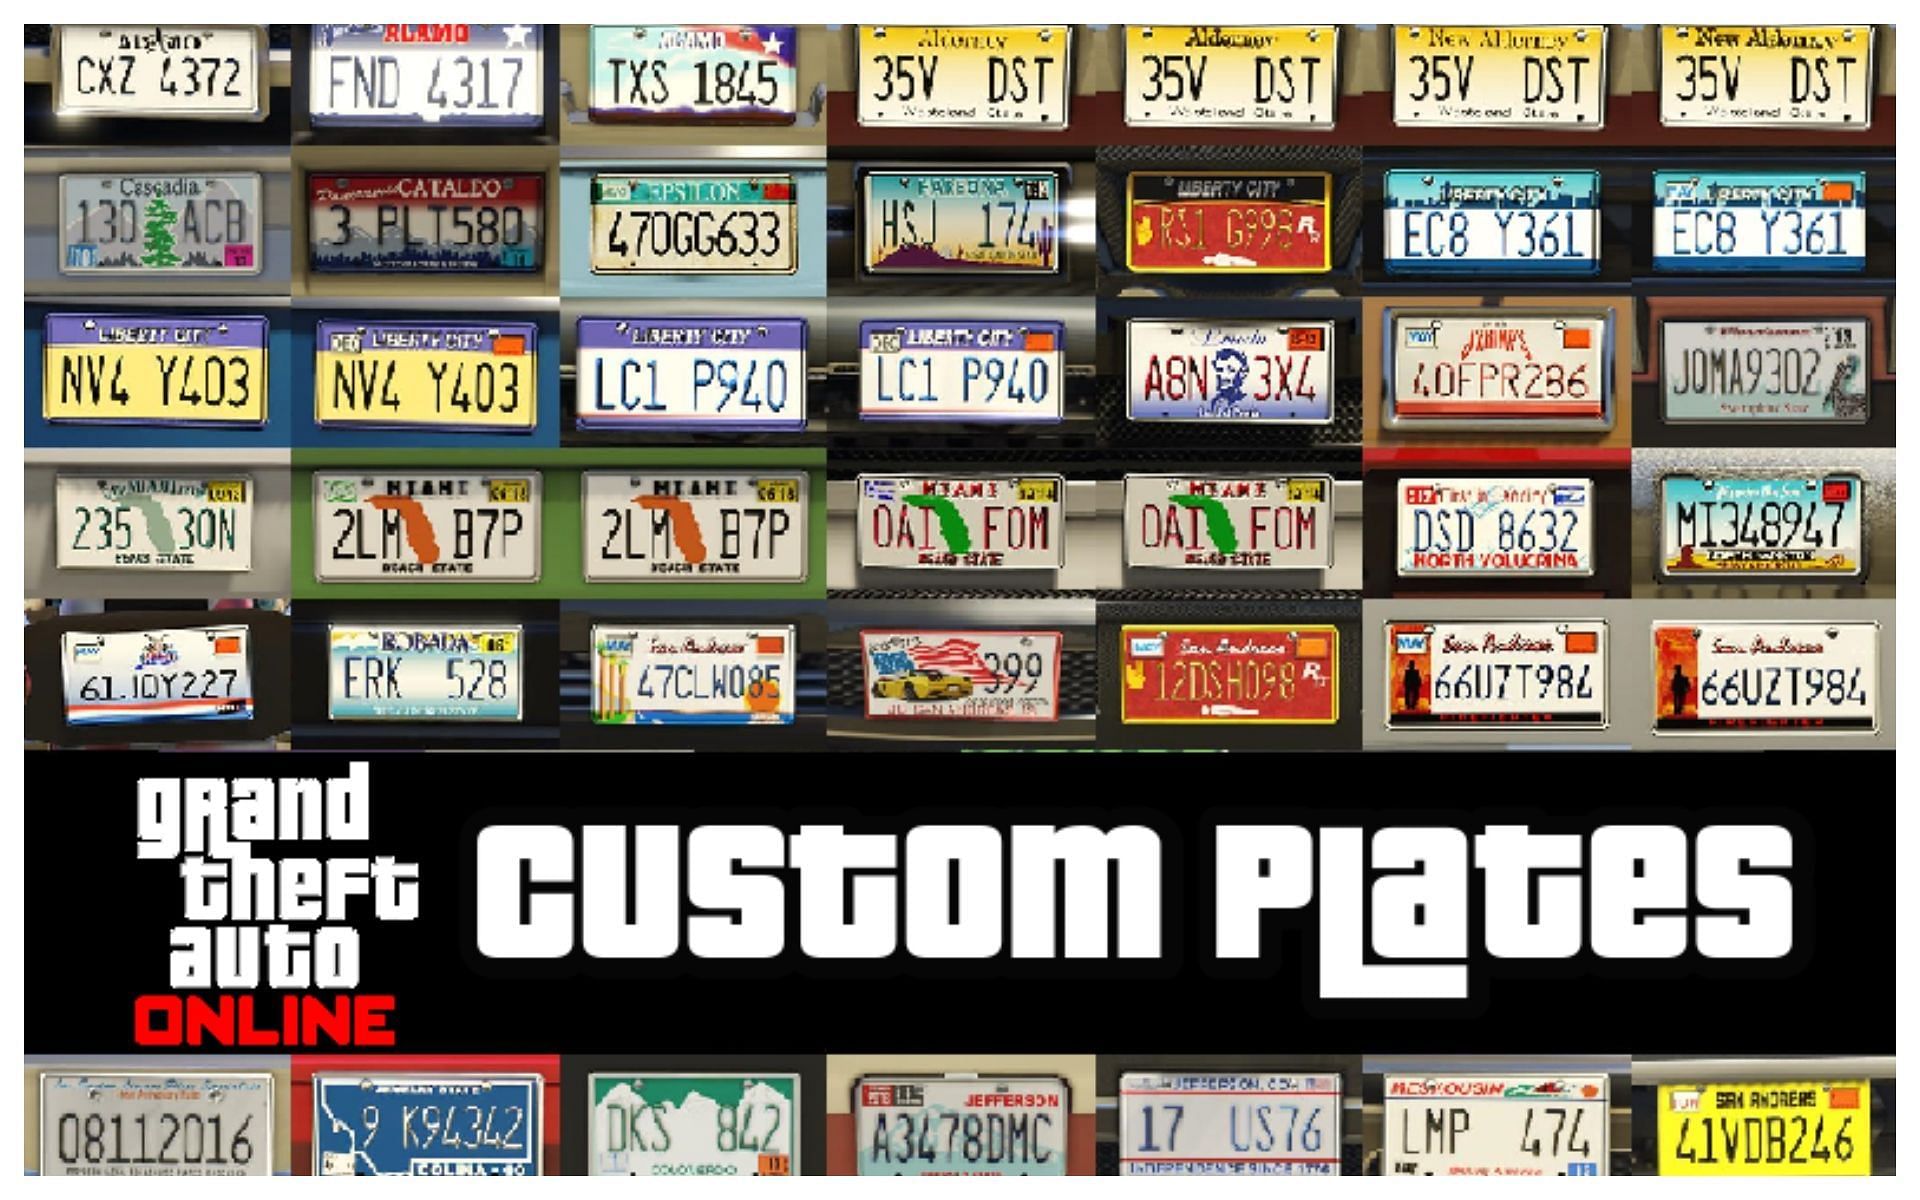 How to get custom plates in GTA Online (2022)